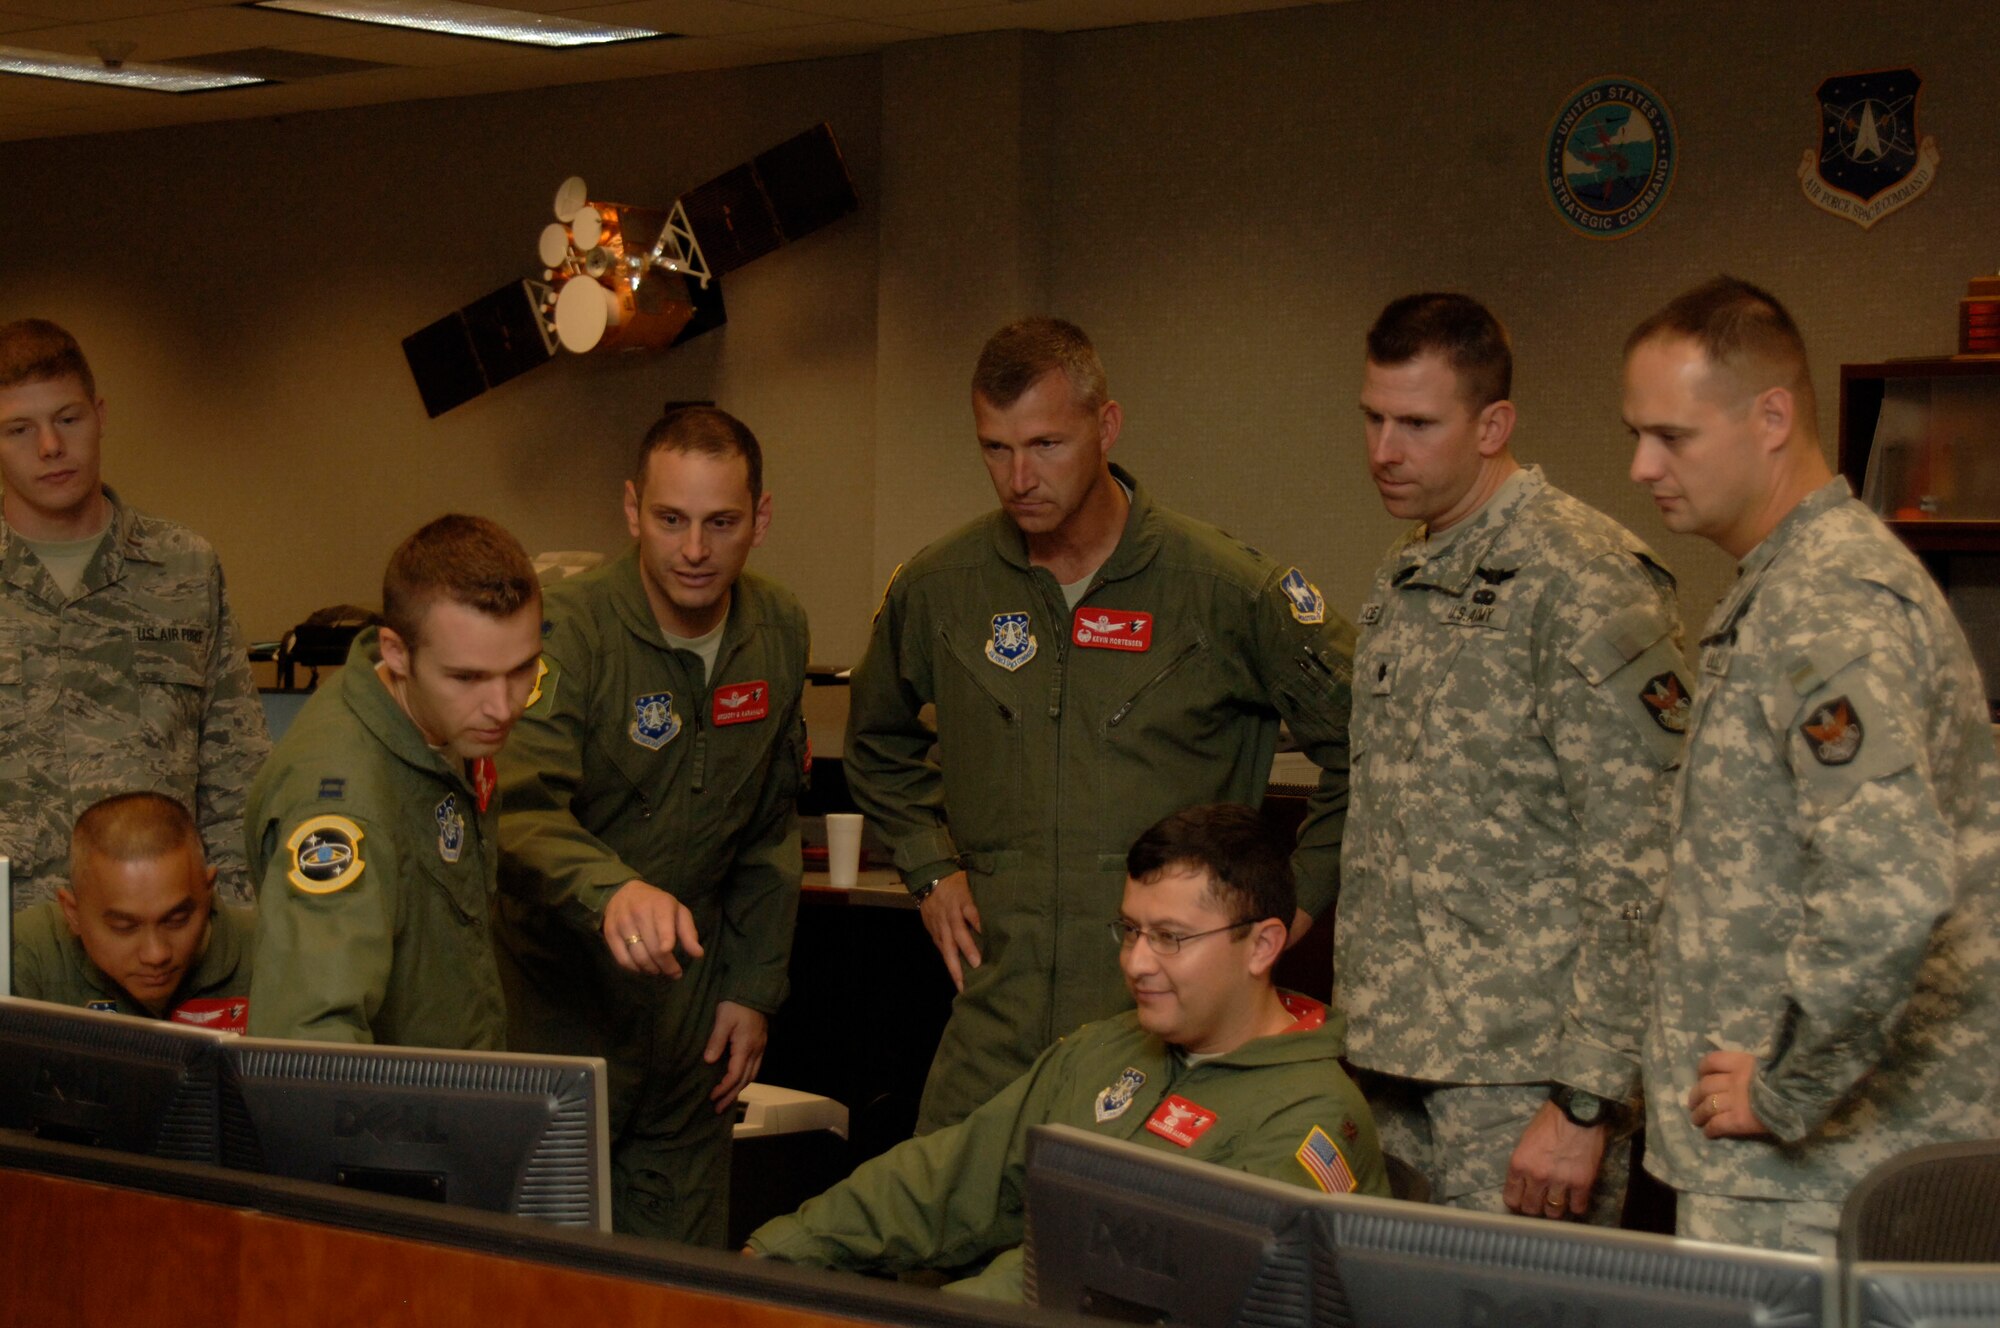 SCHRIEVER AIR FORCE BASE, Colo. -- Lt. Col. Kevin Mortensen, 3rd Space Operations Squadron commander, (center) and Lt. Col. Benjamin Jones, 53rd Signal Battalion commander (second from right), lead 3 SOPS members in deactivating the Defense Satellite Communications System B9 satellite here Aug. 12. (U.S. Air Force photo\Scott Prater).